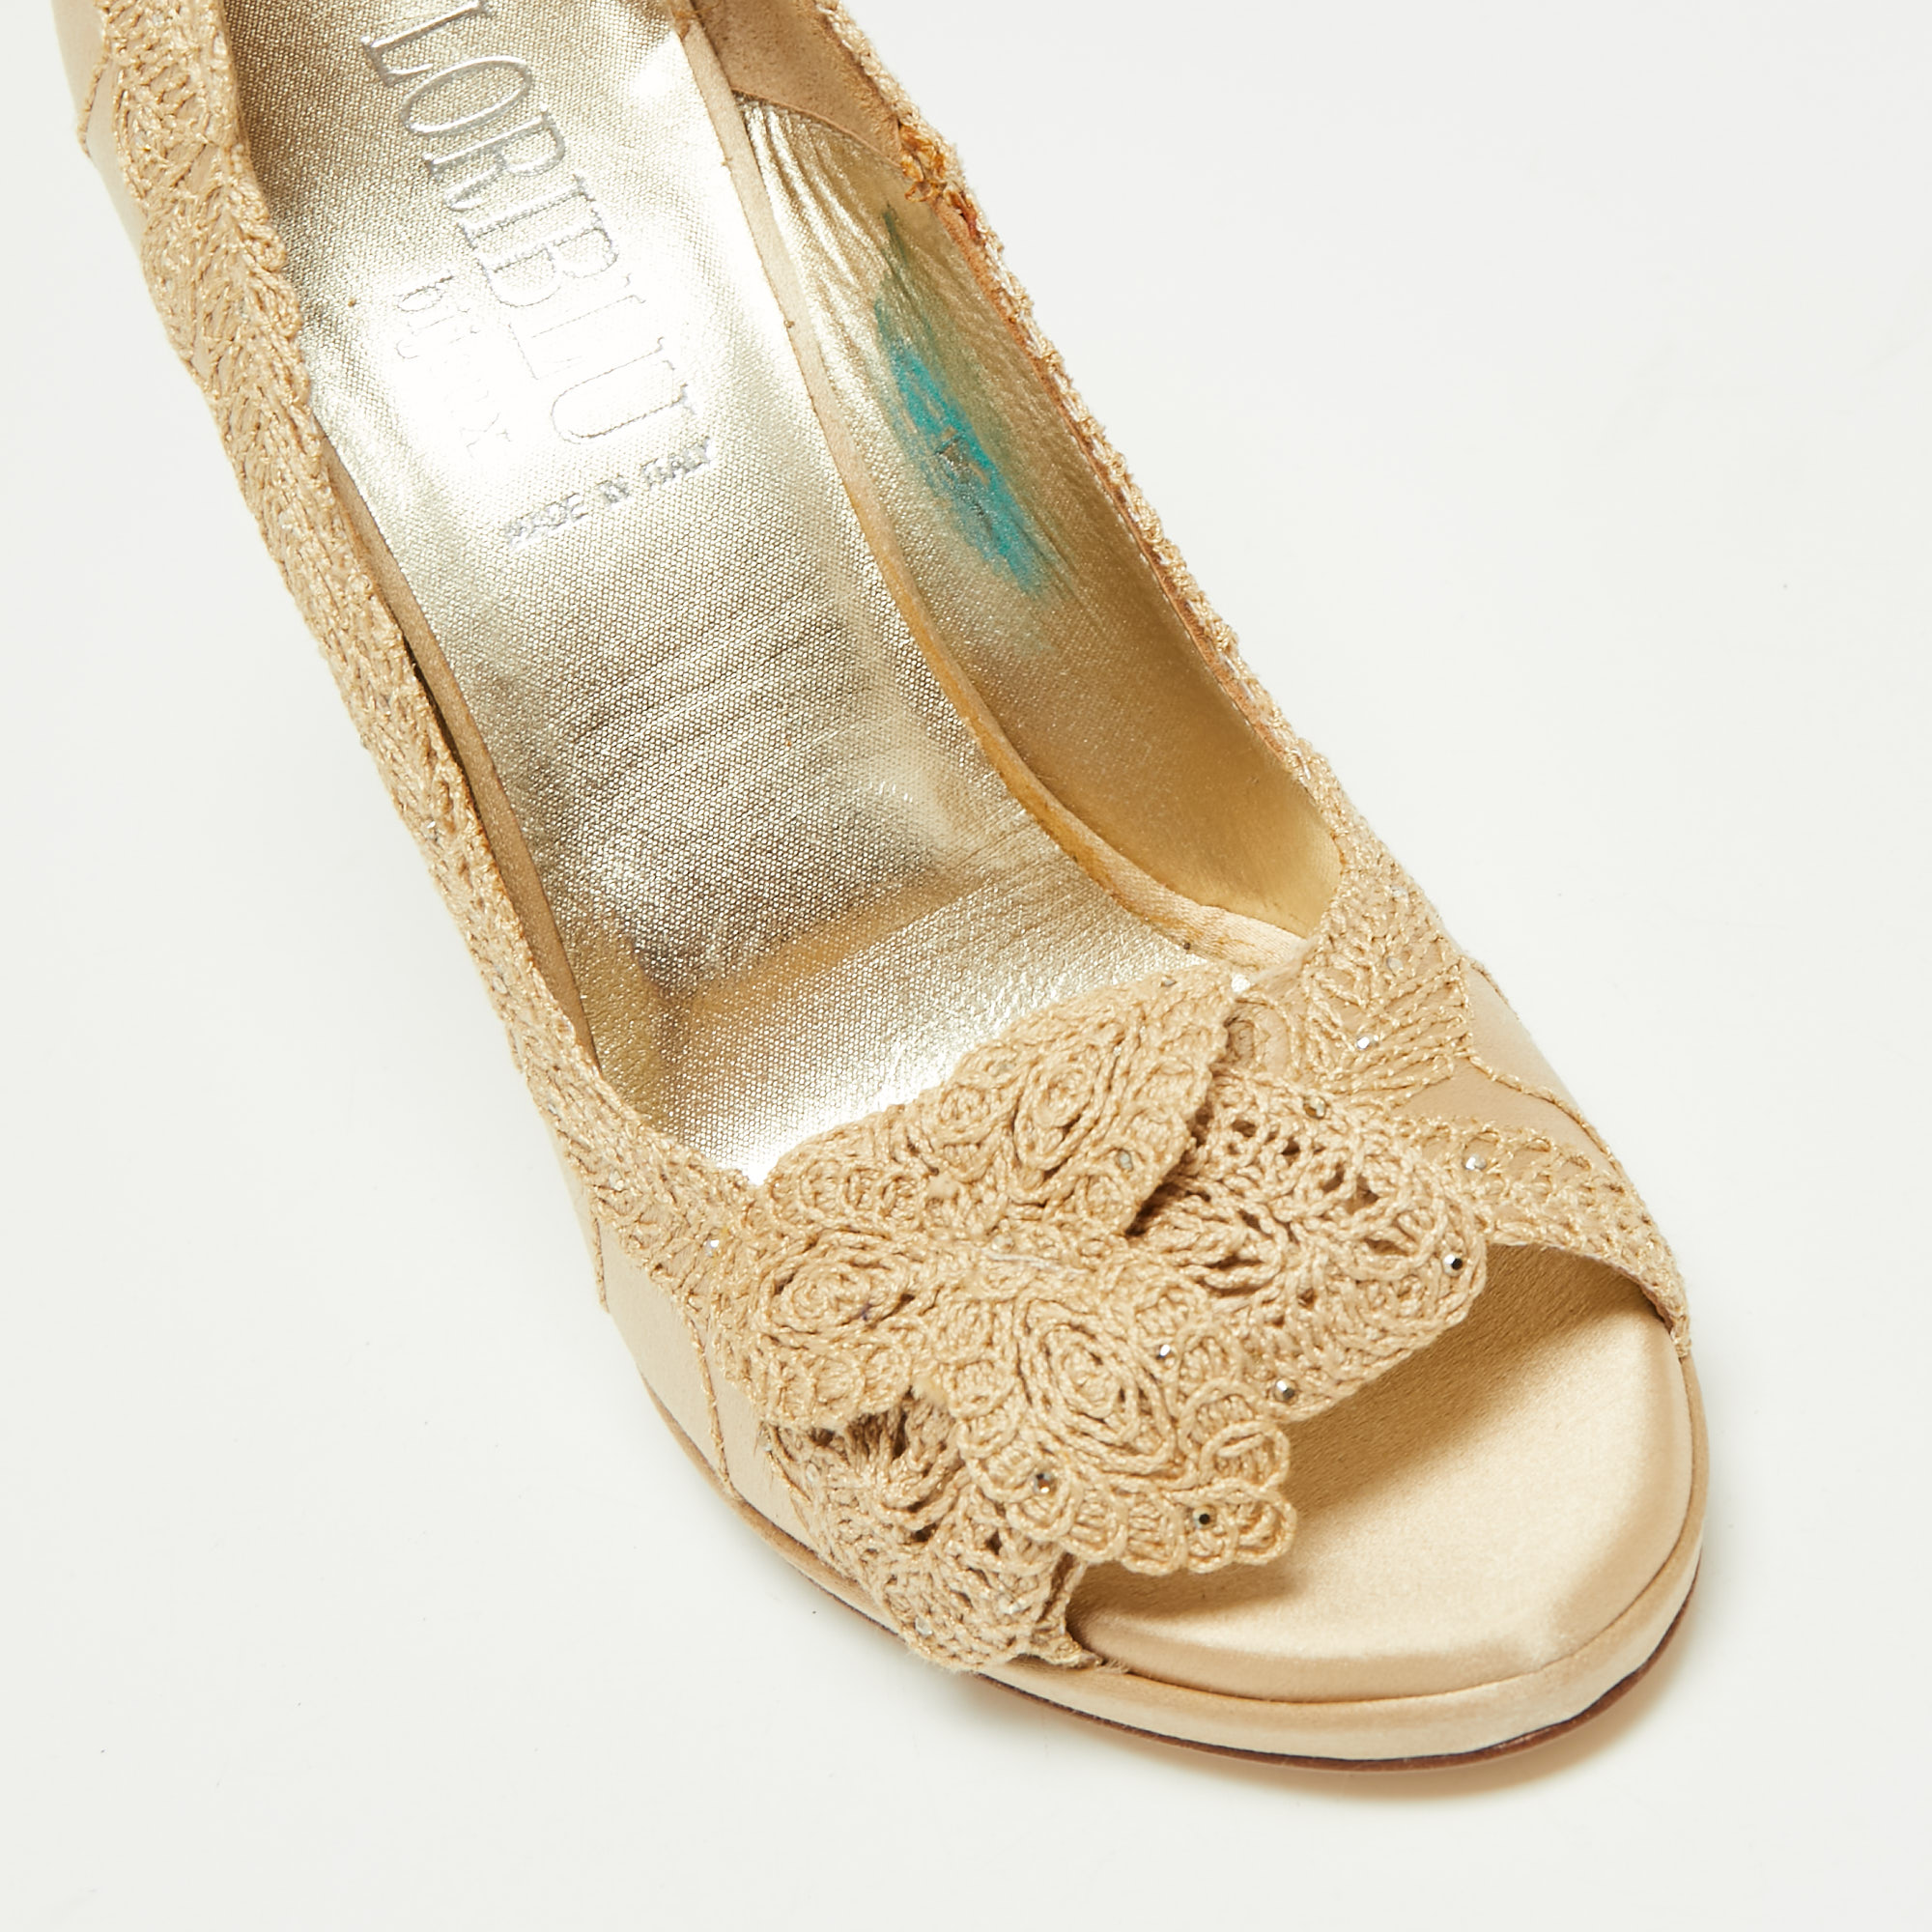 Loriblu Beige Satin And Lace Embroidered Peep Toe Pumps Size 36